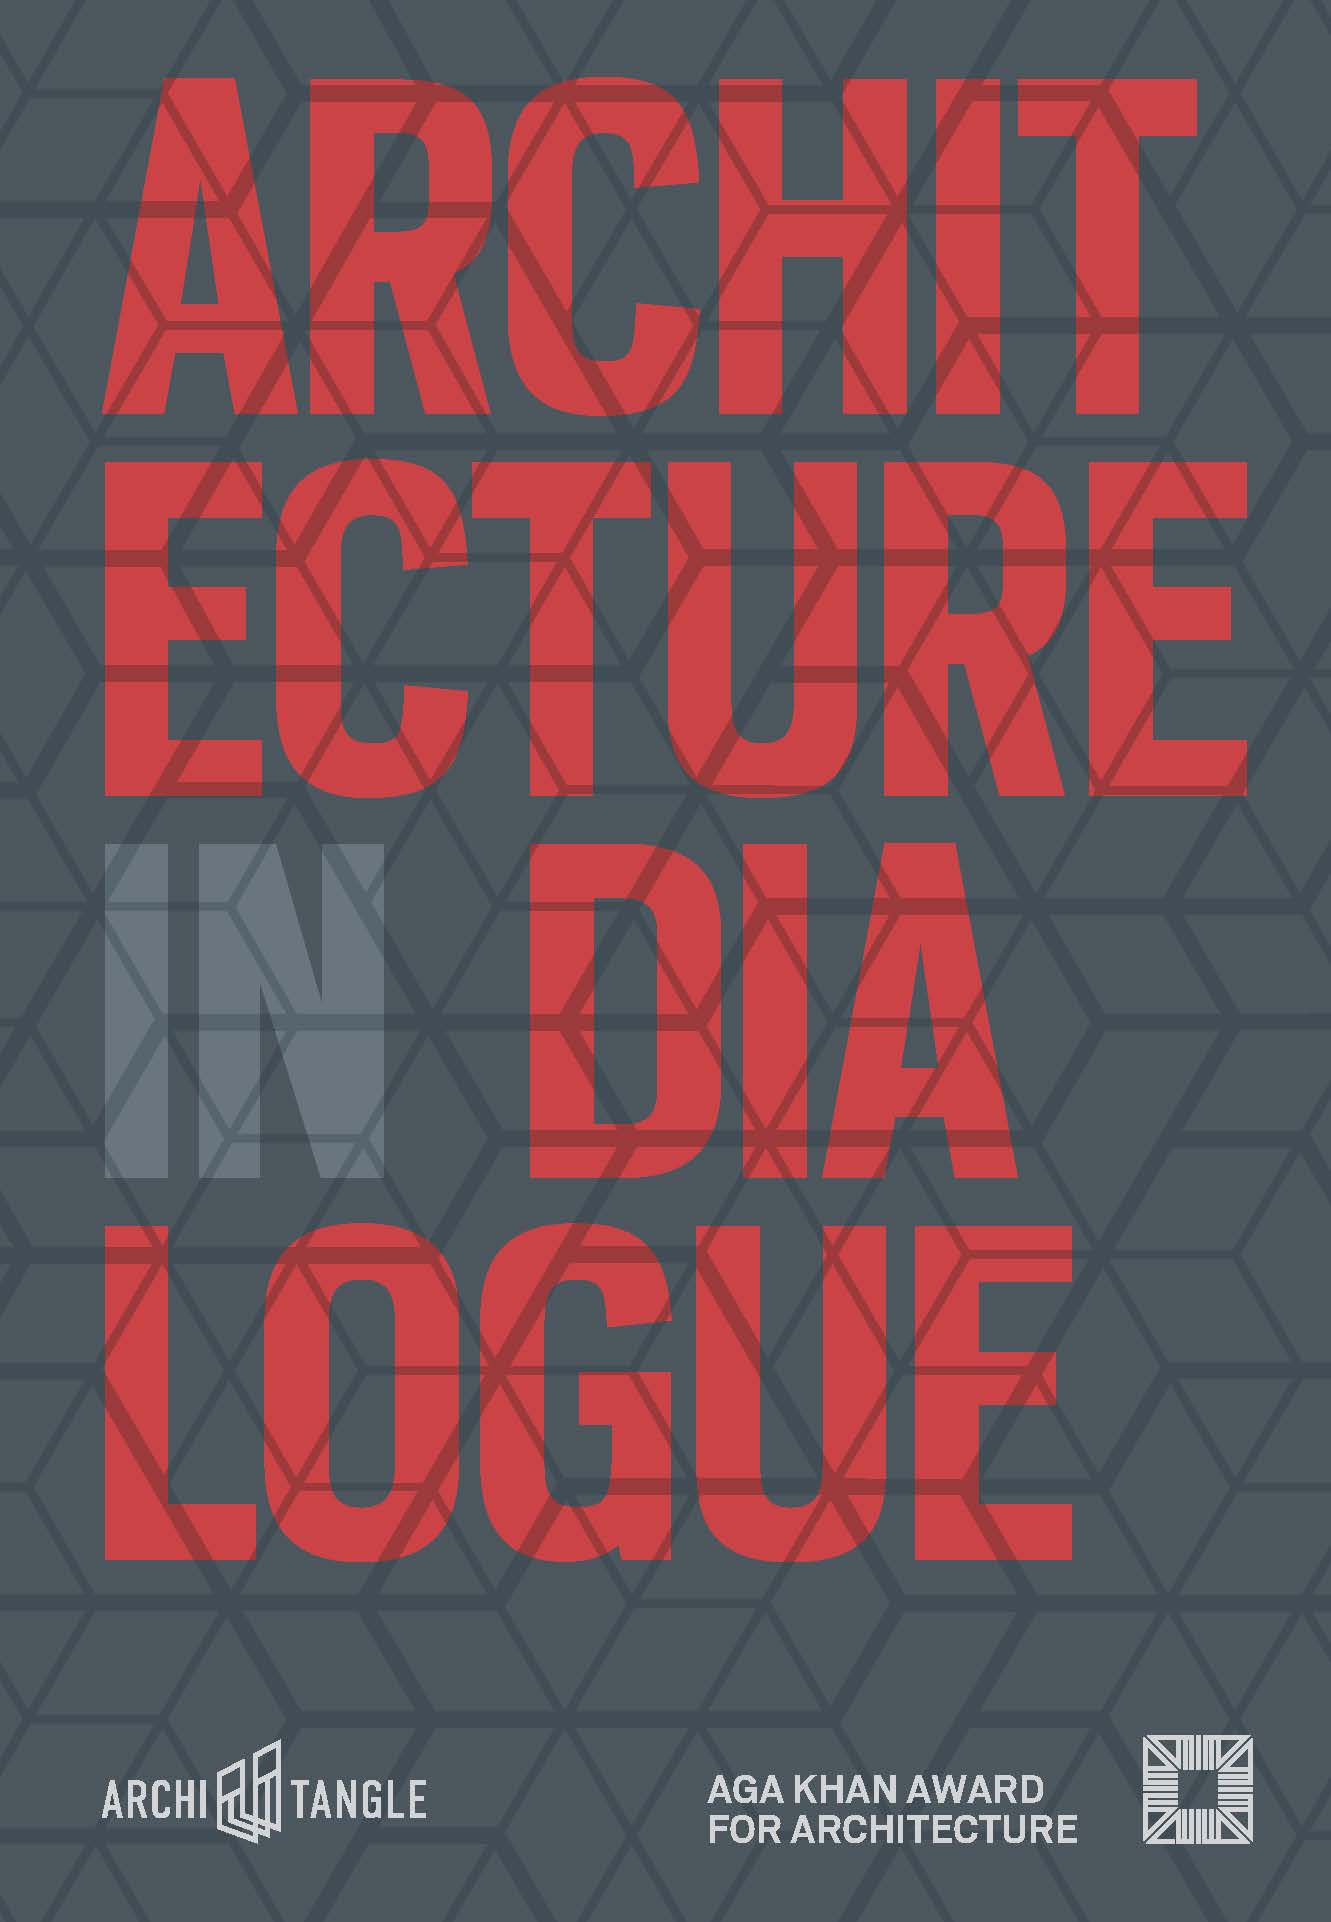 Architecture in Dialogue